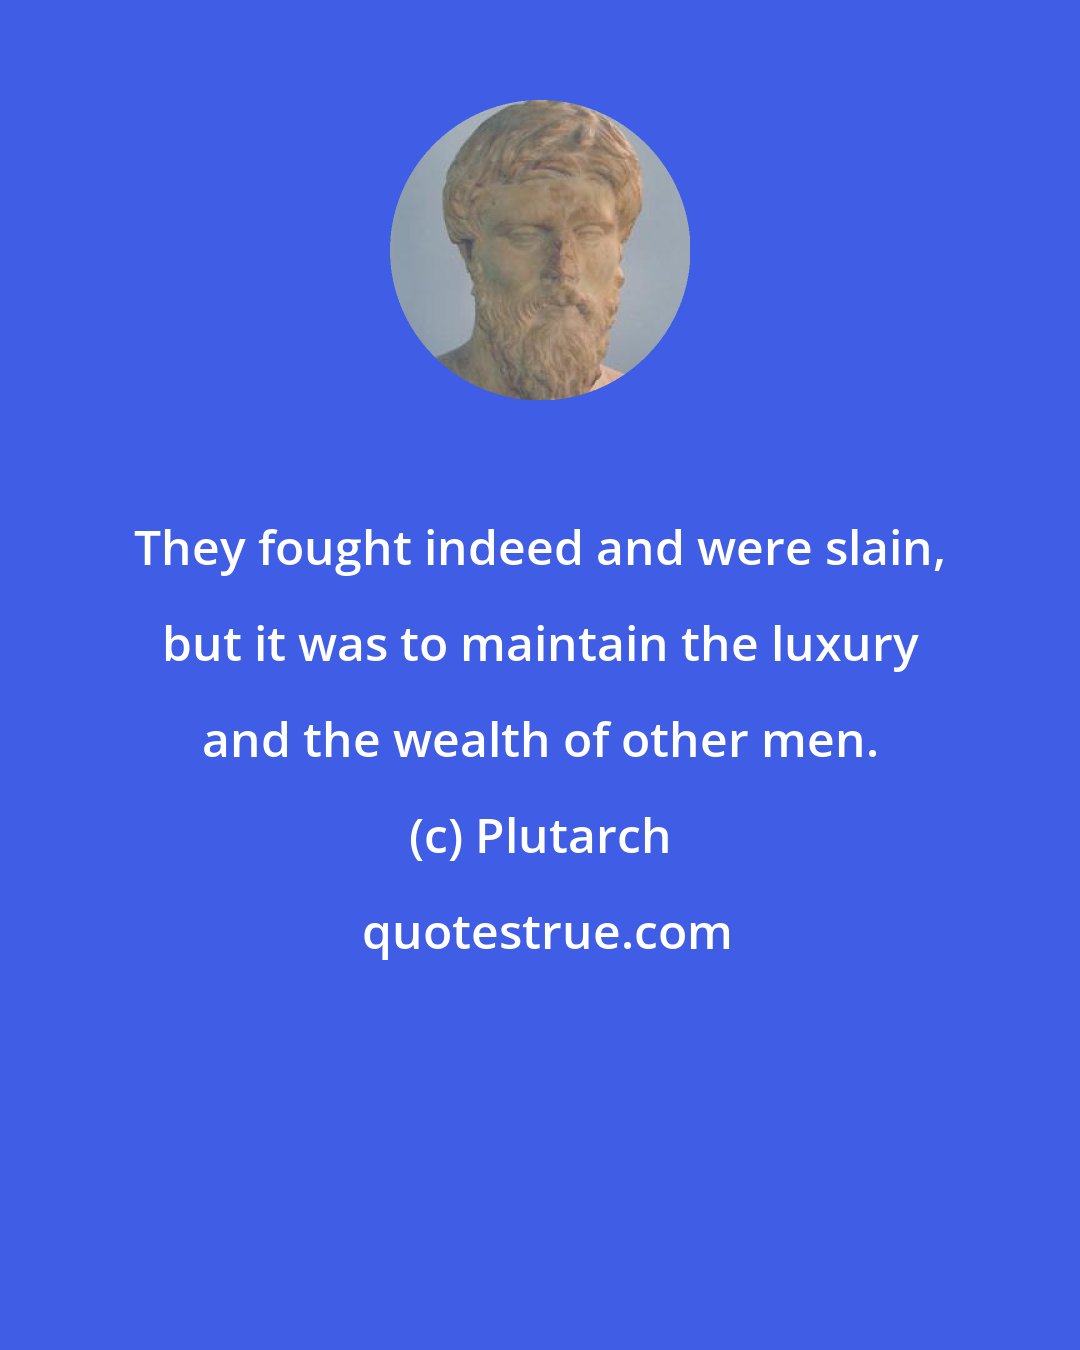 Plutarch: They fought indeed and were slain, but it was to maintain the luxury and the wealth of other men.